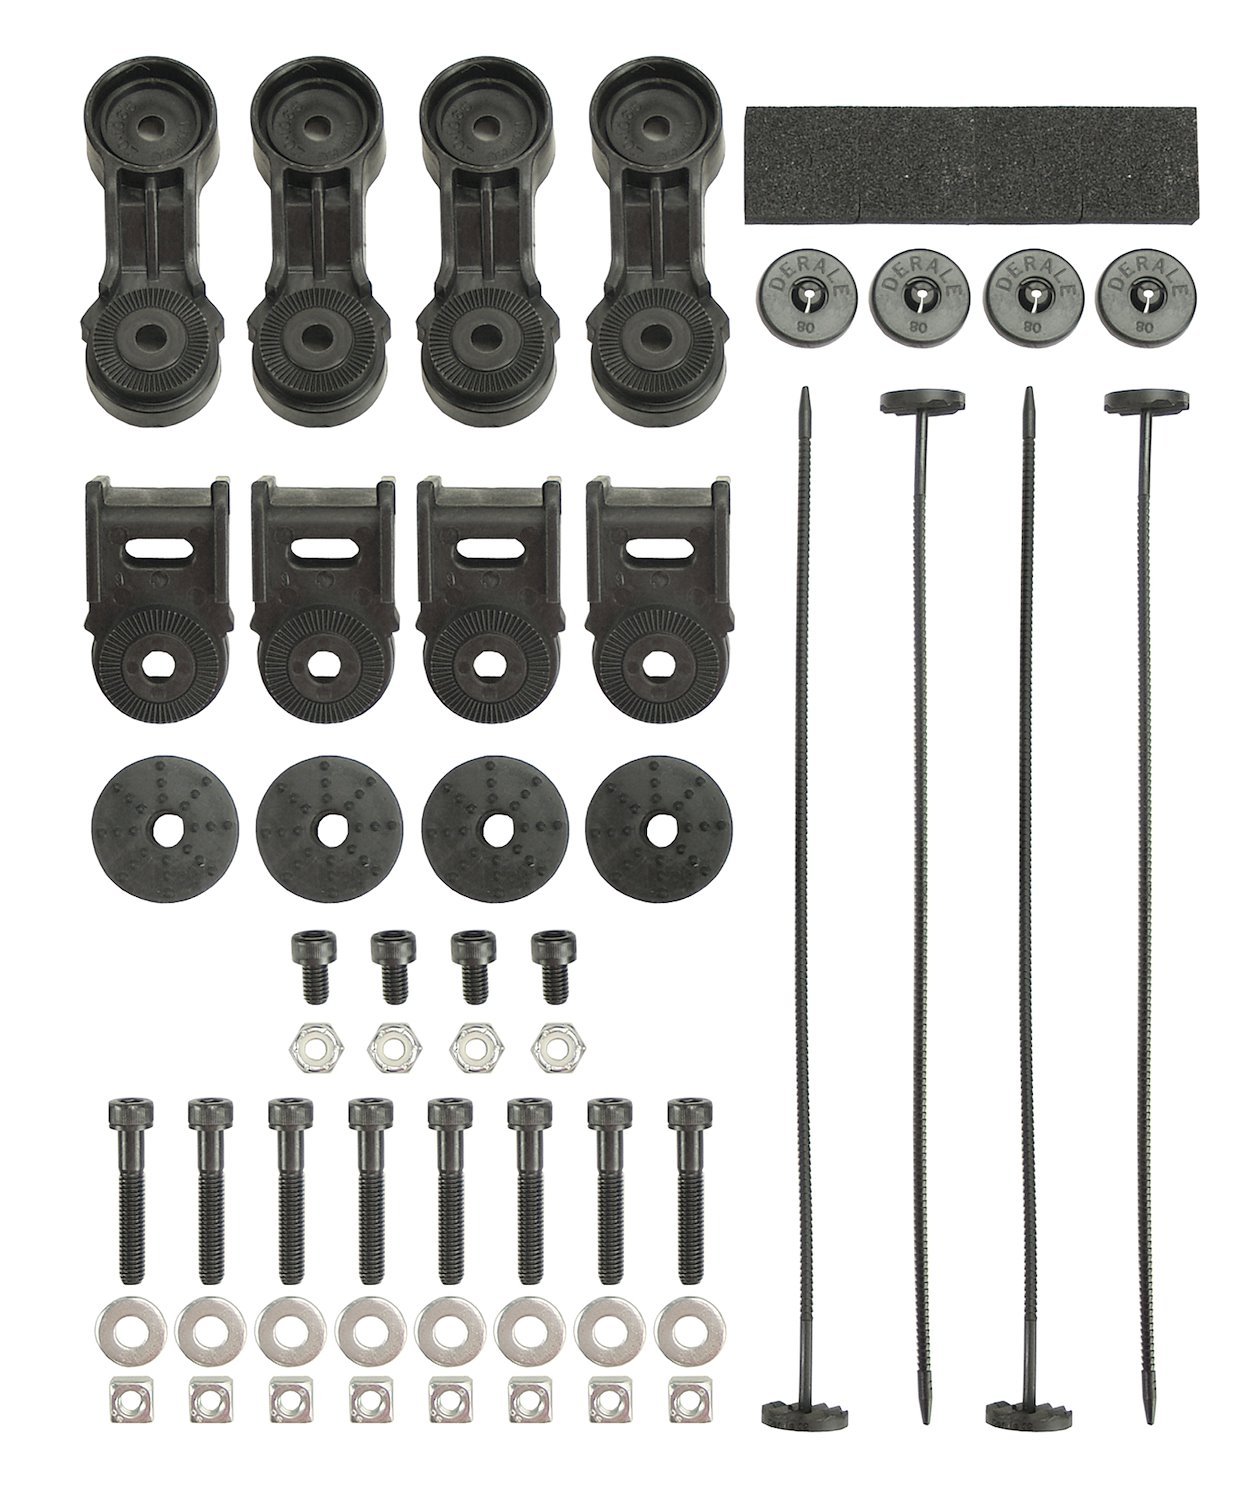 Single to Dual Fan Mounting Kit Includes: Ratcheting Brackets, Nylon Rods & Clips